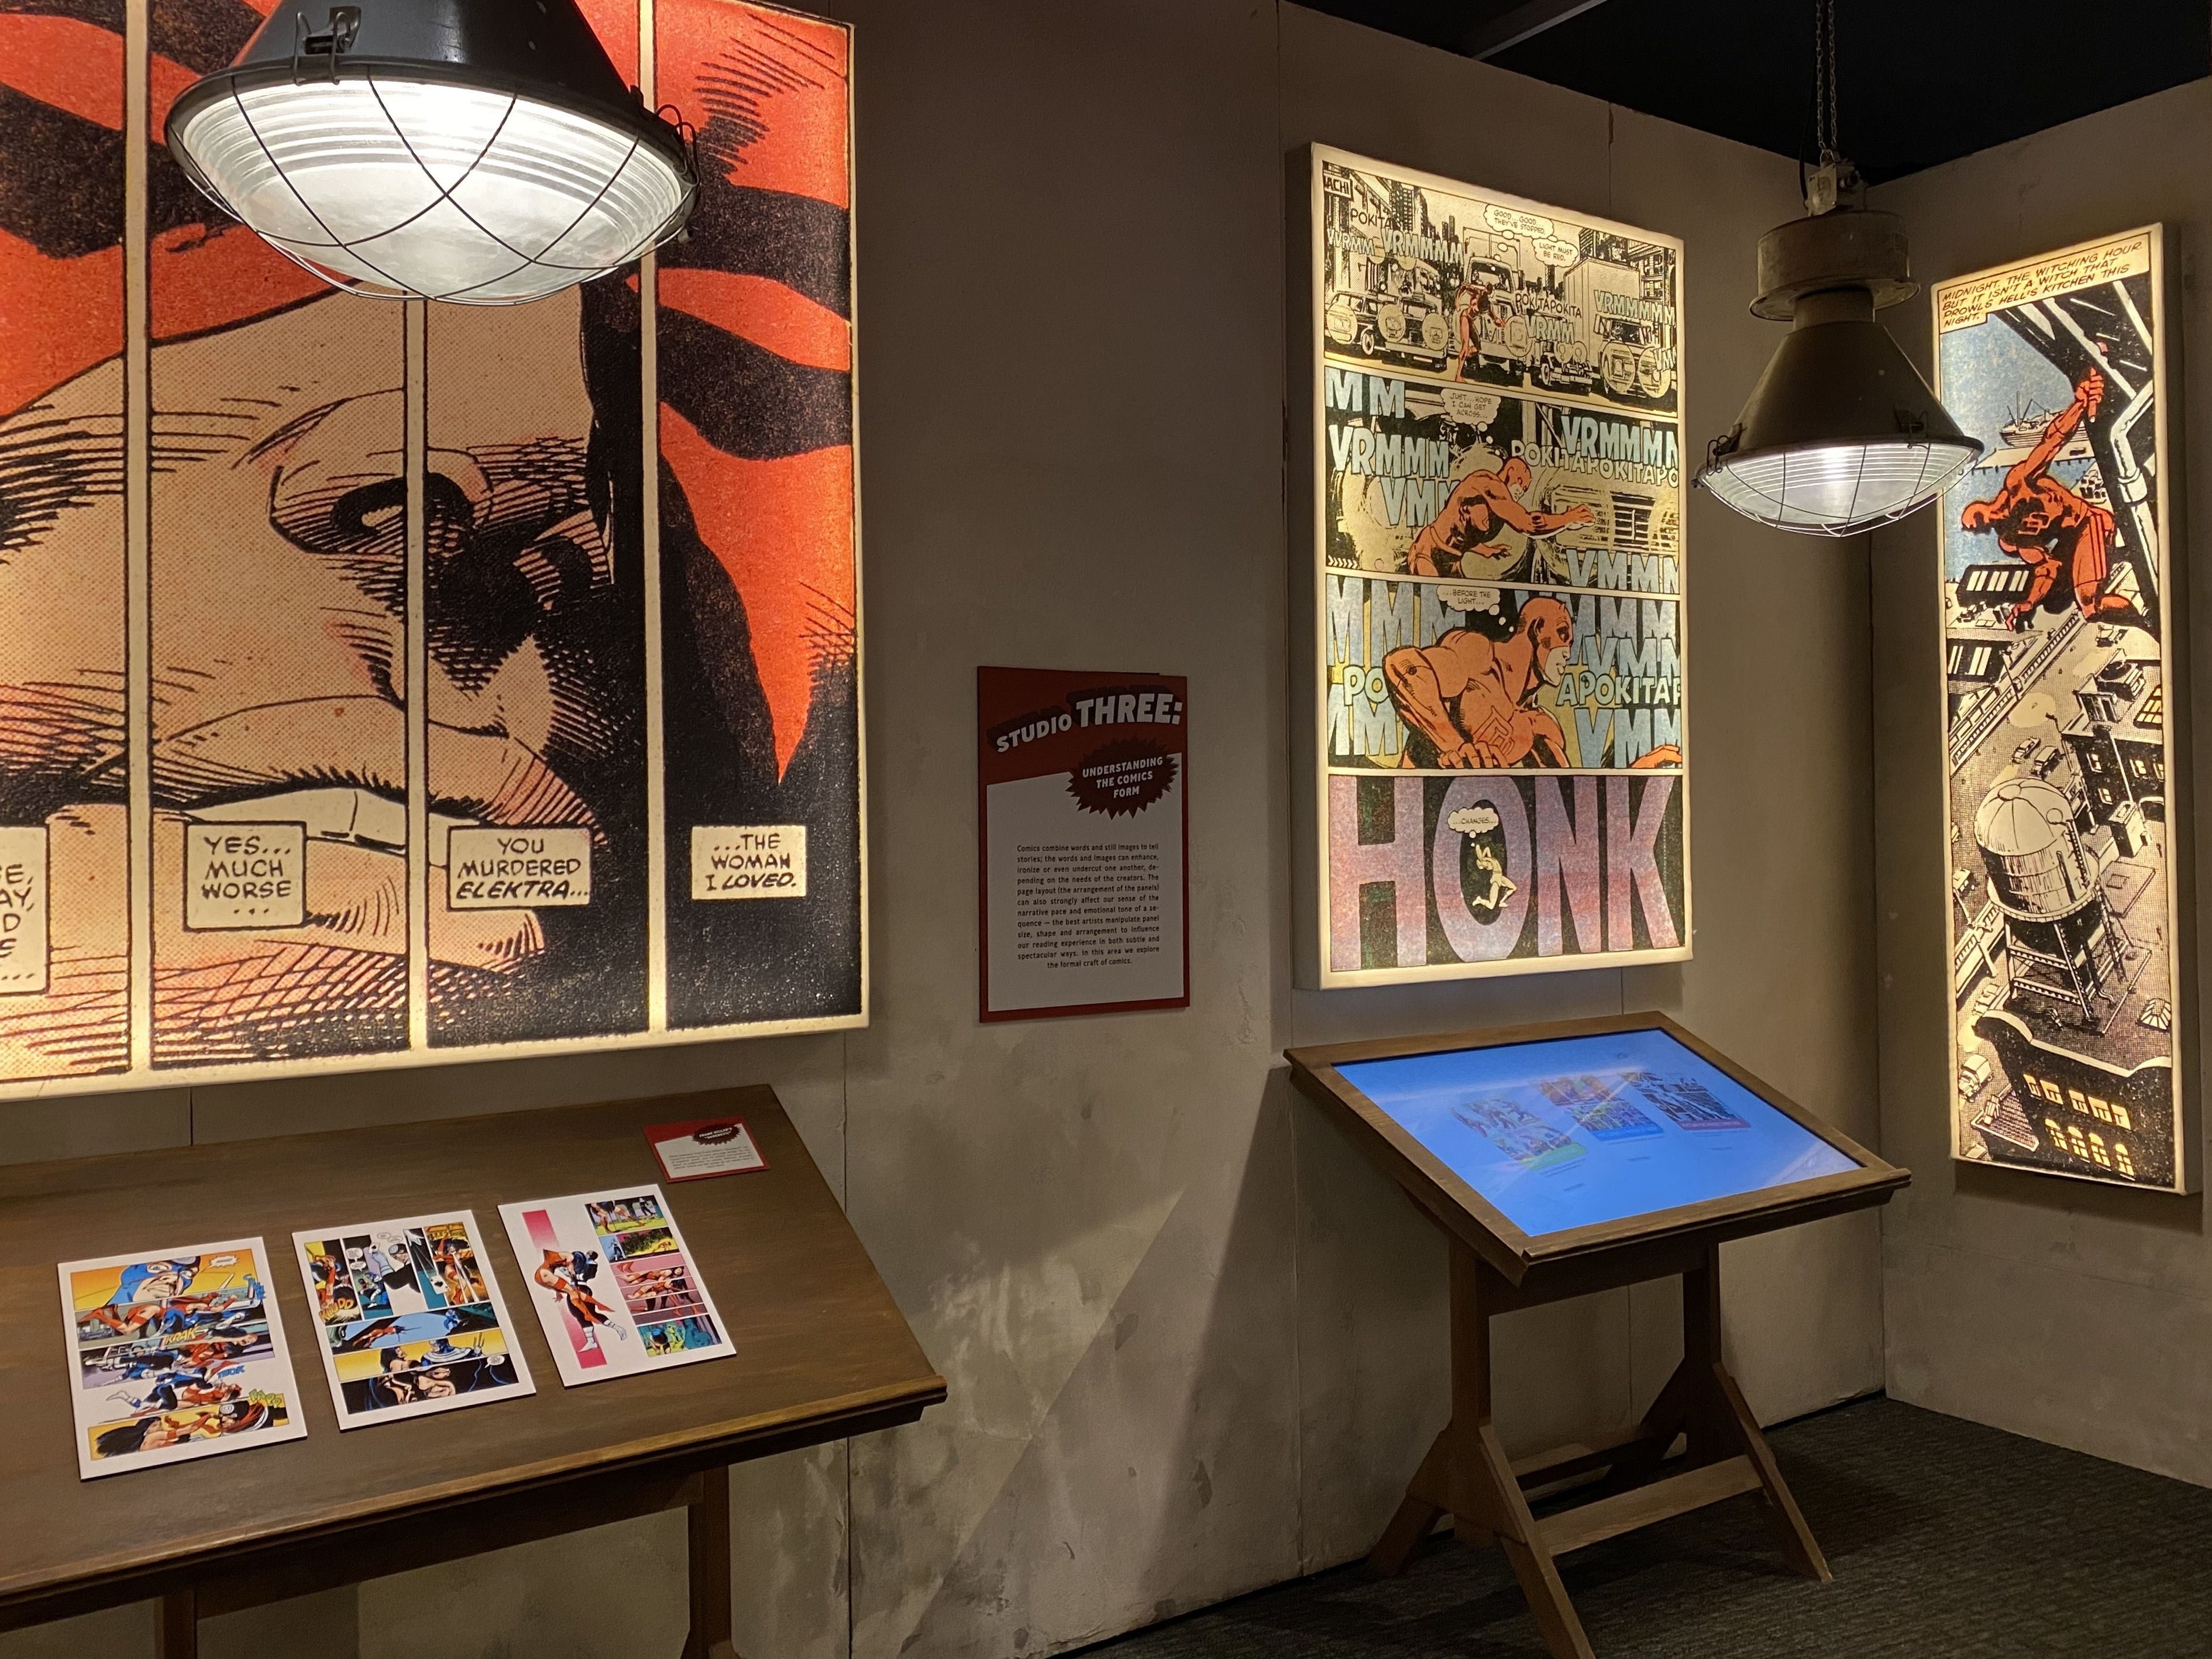 A interactive exhibit explaining how sketches come to life as comics